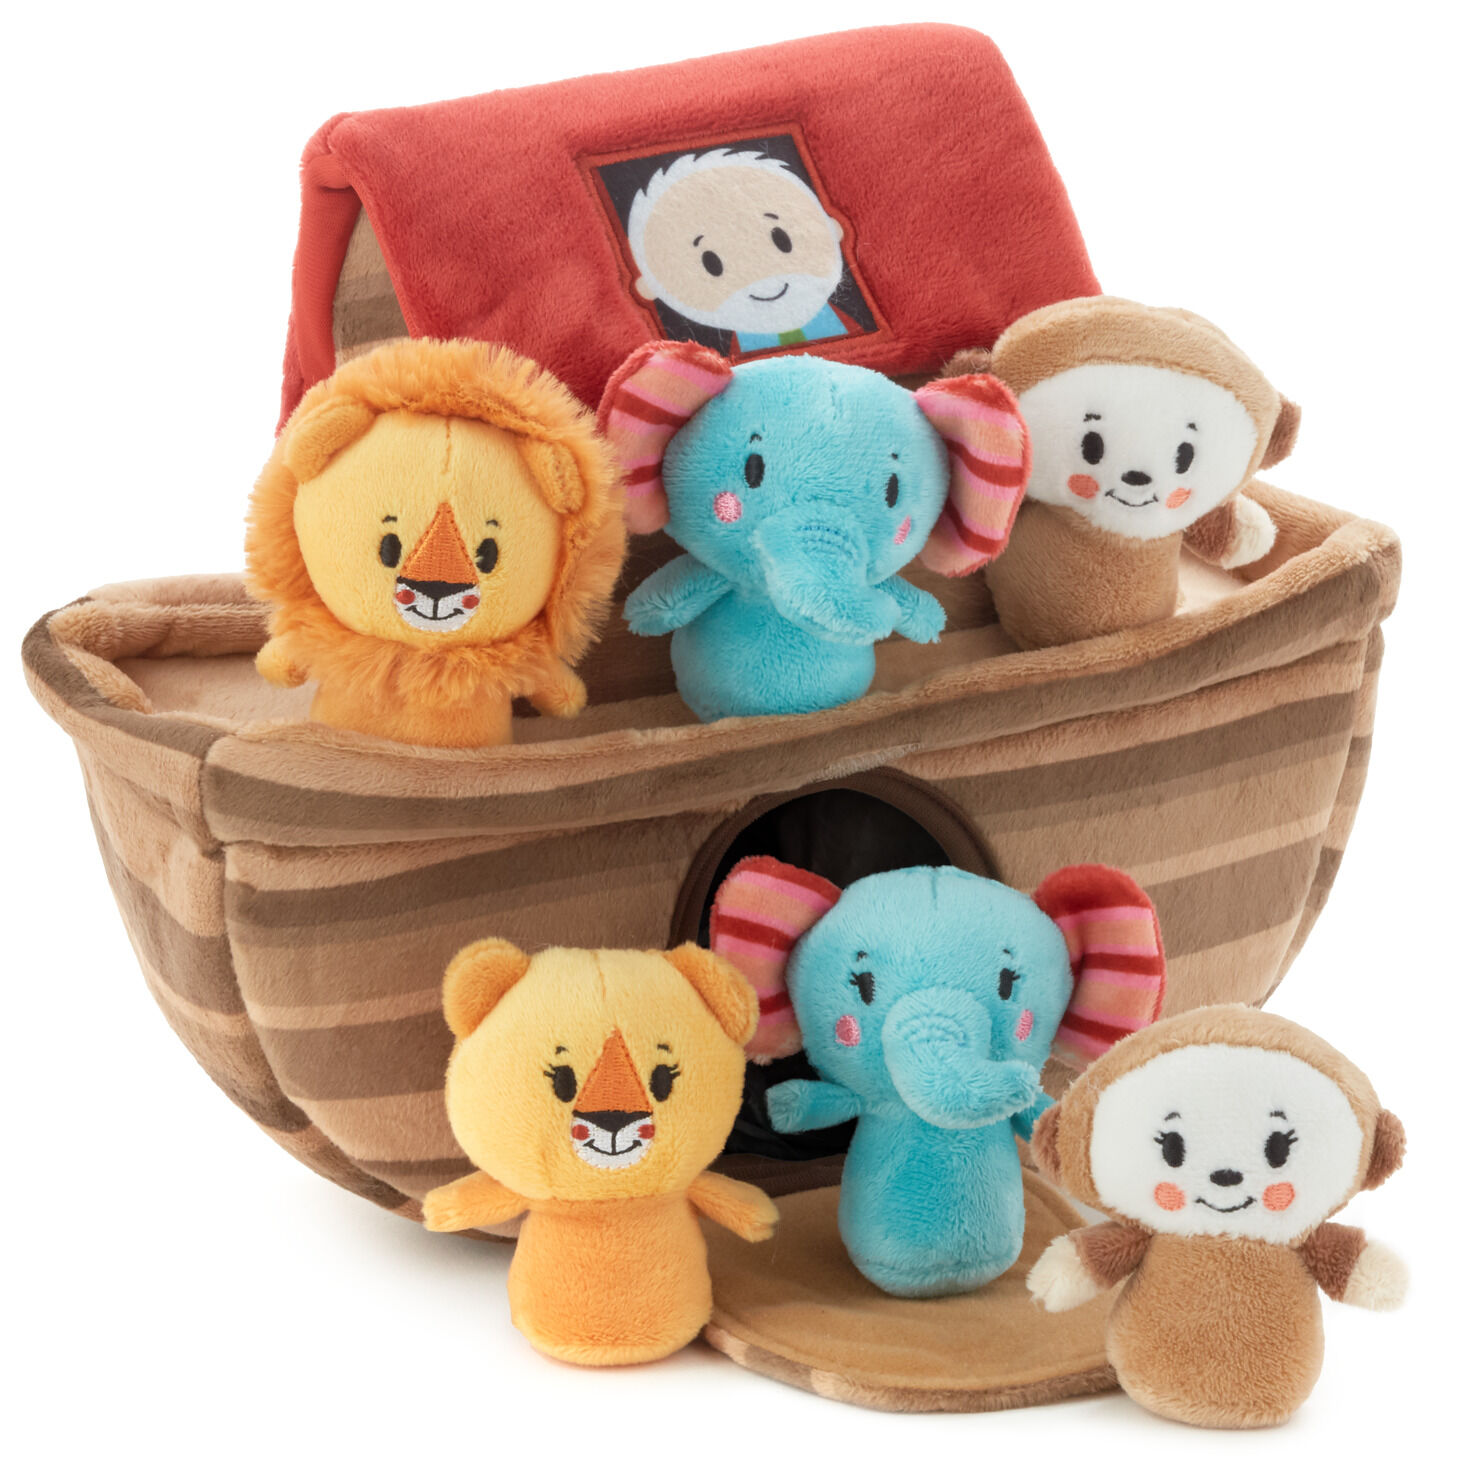 Noah's Ark and Animals Plush Playset, 7 Pieces for only USD 34.99 | Hallmark